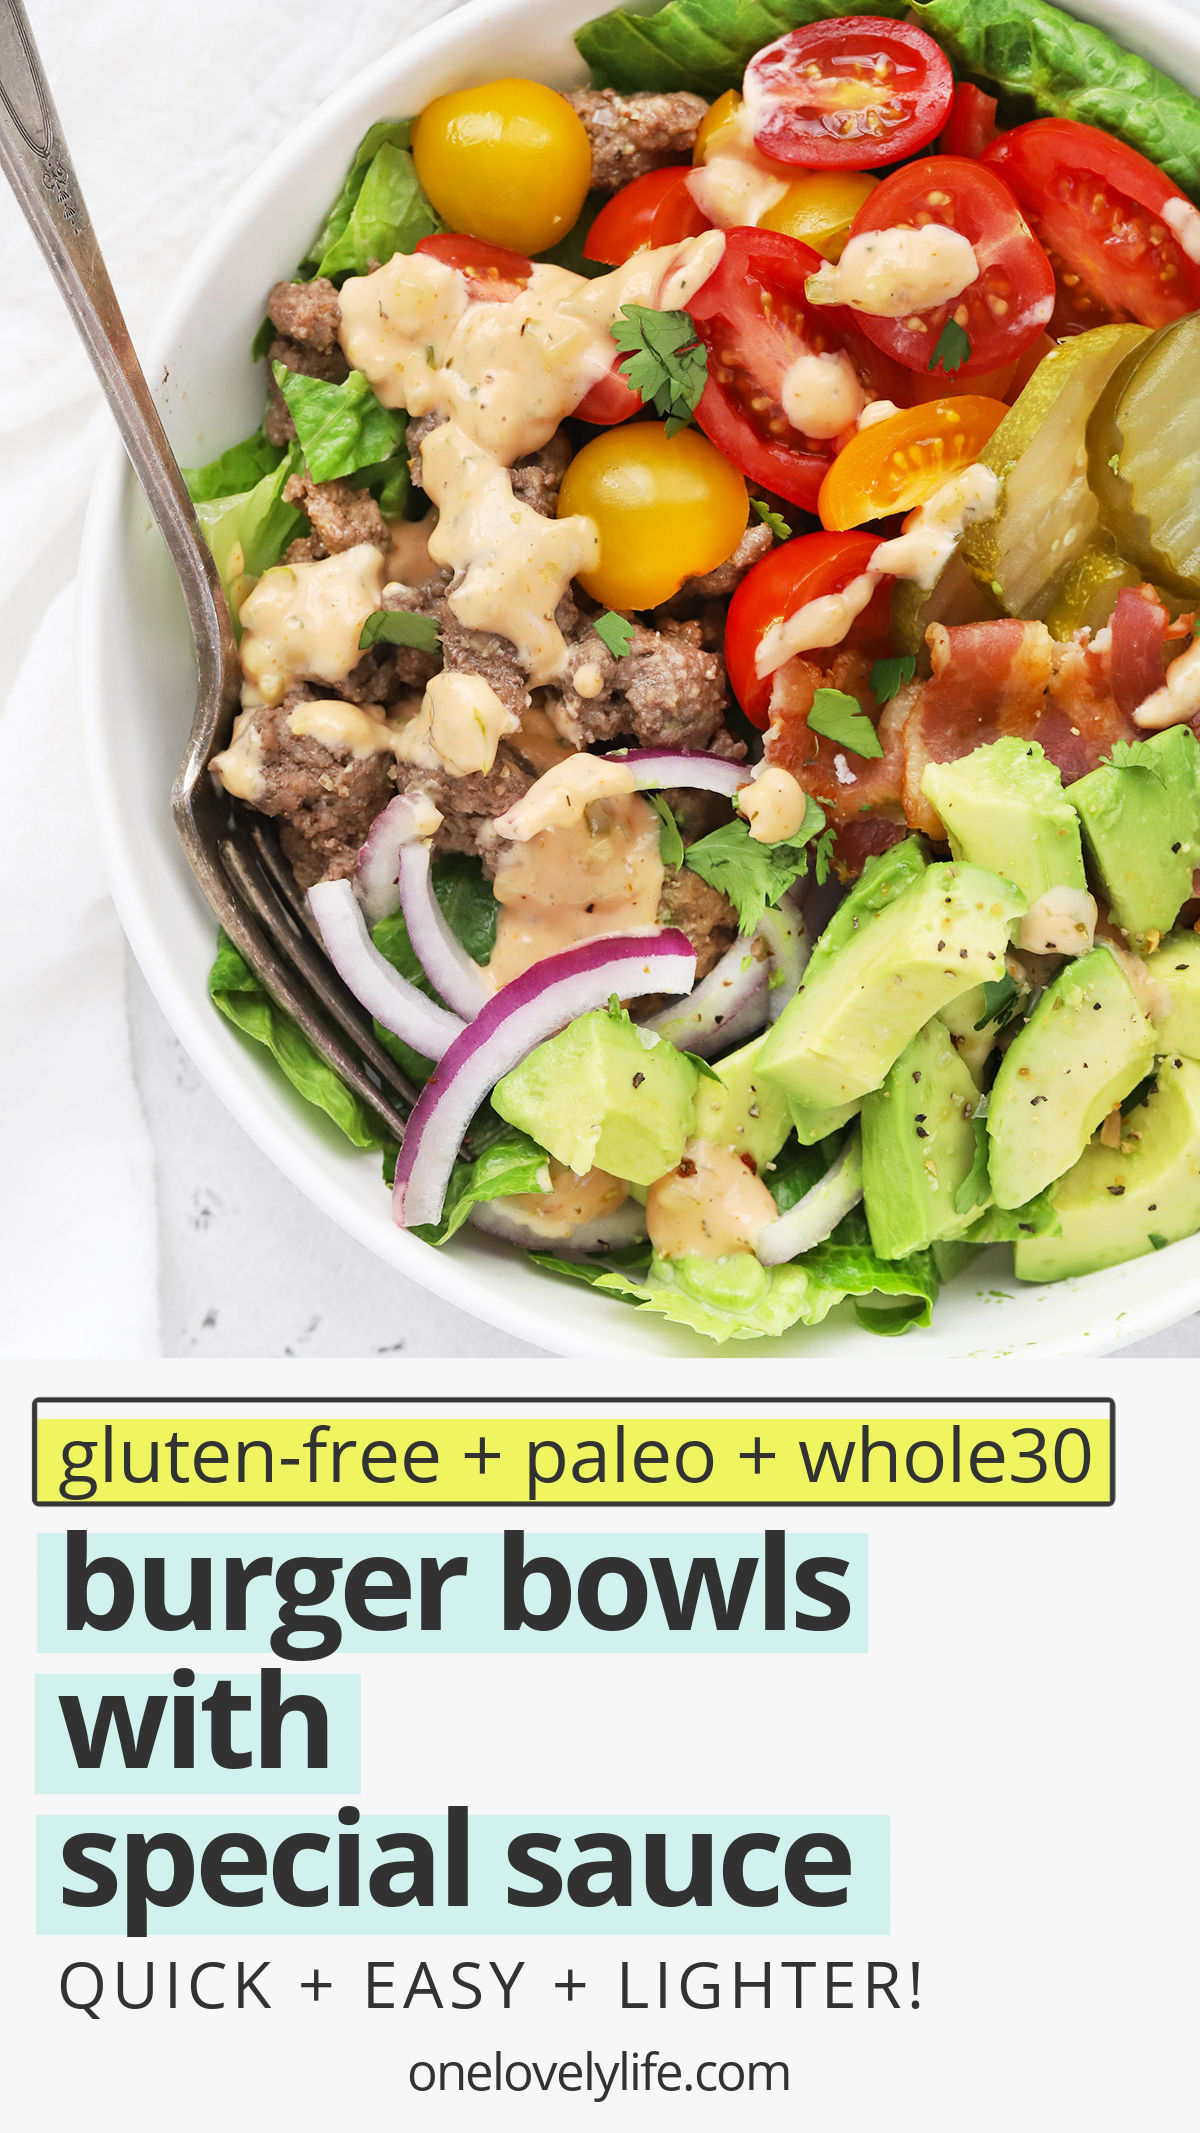 Burger Bowls with Special Sauce - Load all your favorite hamburger toppings onto a bed of greens and drizzle with our favorite special sauce to build an amazing burger salad. (Gluten-Free, Paleo & Whole30-Friendly) // Whole30 Burger Bowls // Special Sauce for Burgers // Paleo Burger Bowl // Burger Salad #paleo #glutenfree #whole30